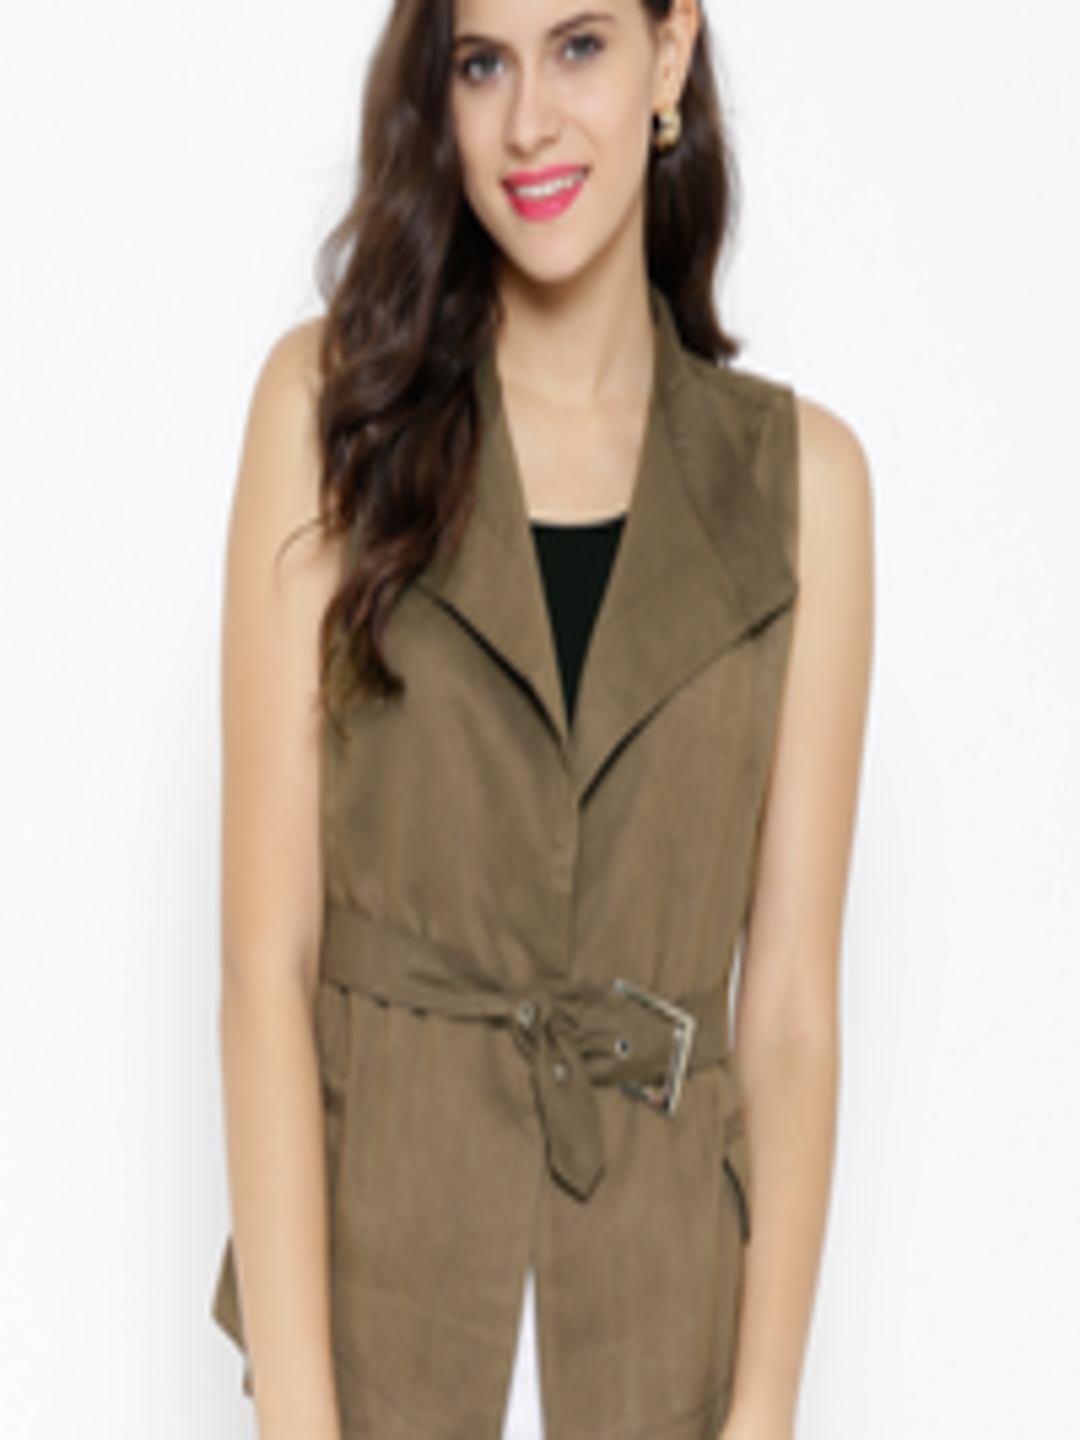 Olive green sleeveless jackets for women lyrics for long cool woman in a black dress